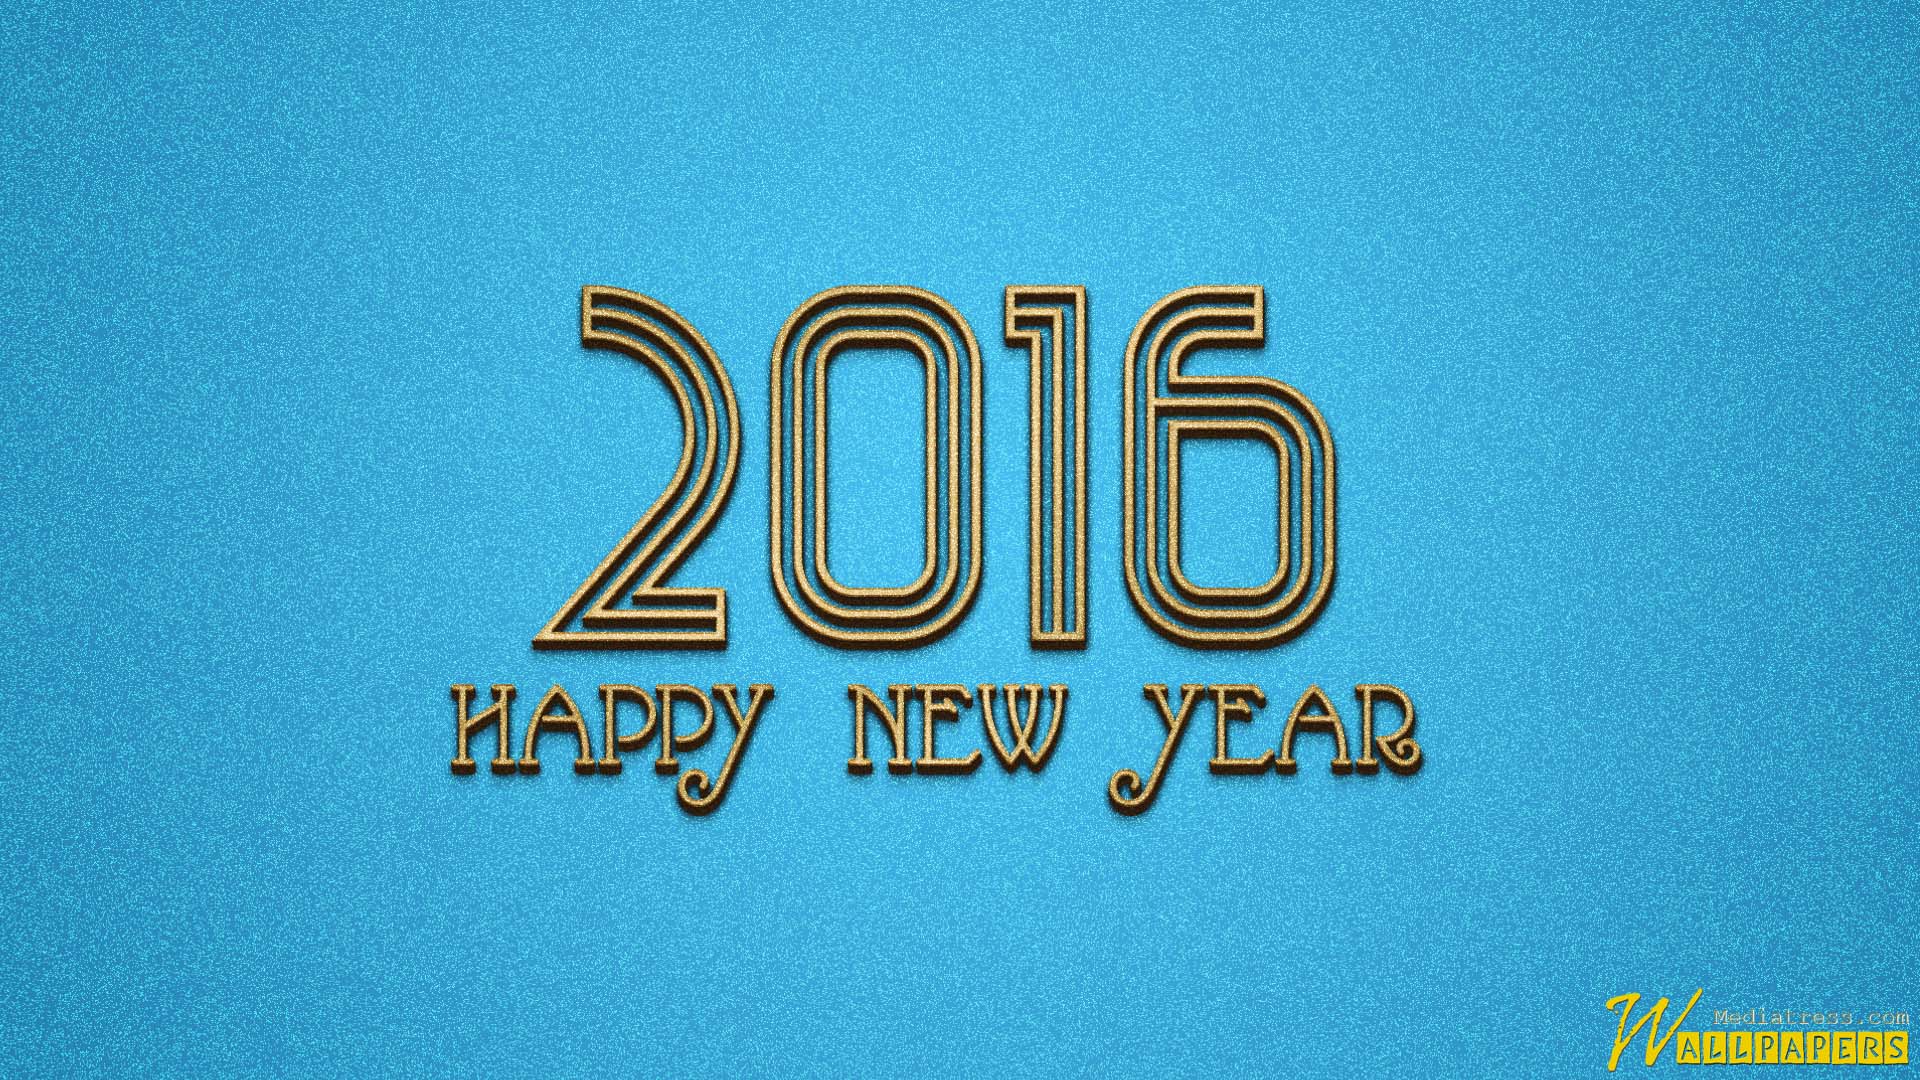 Happy New Year Eve 2016 Wallpaper